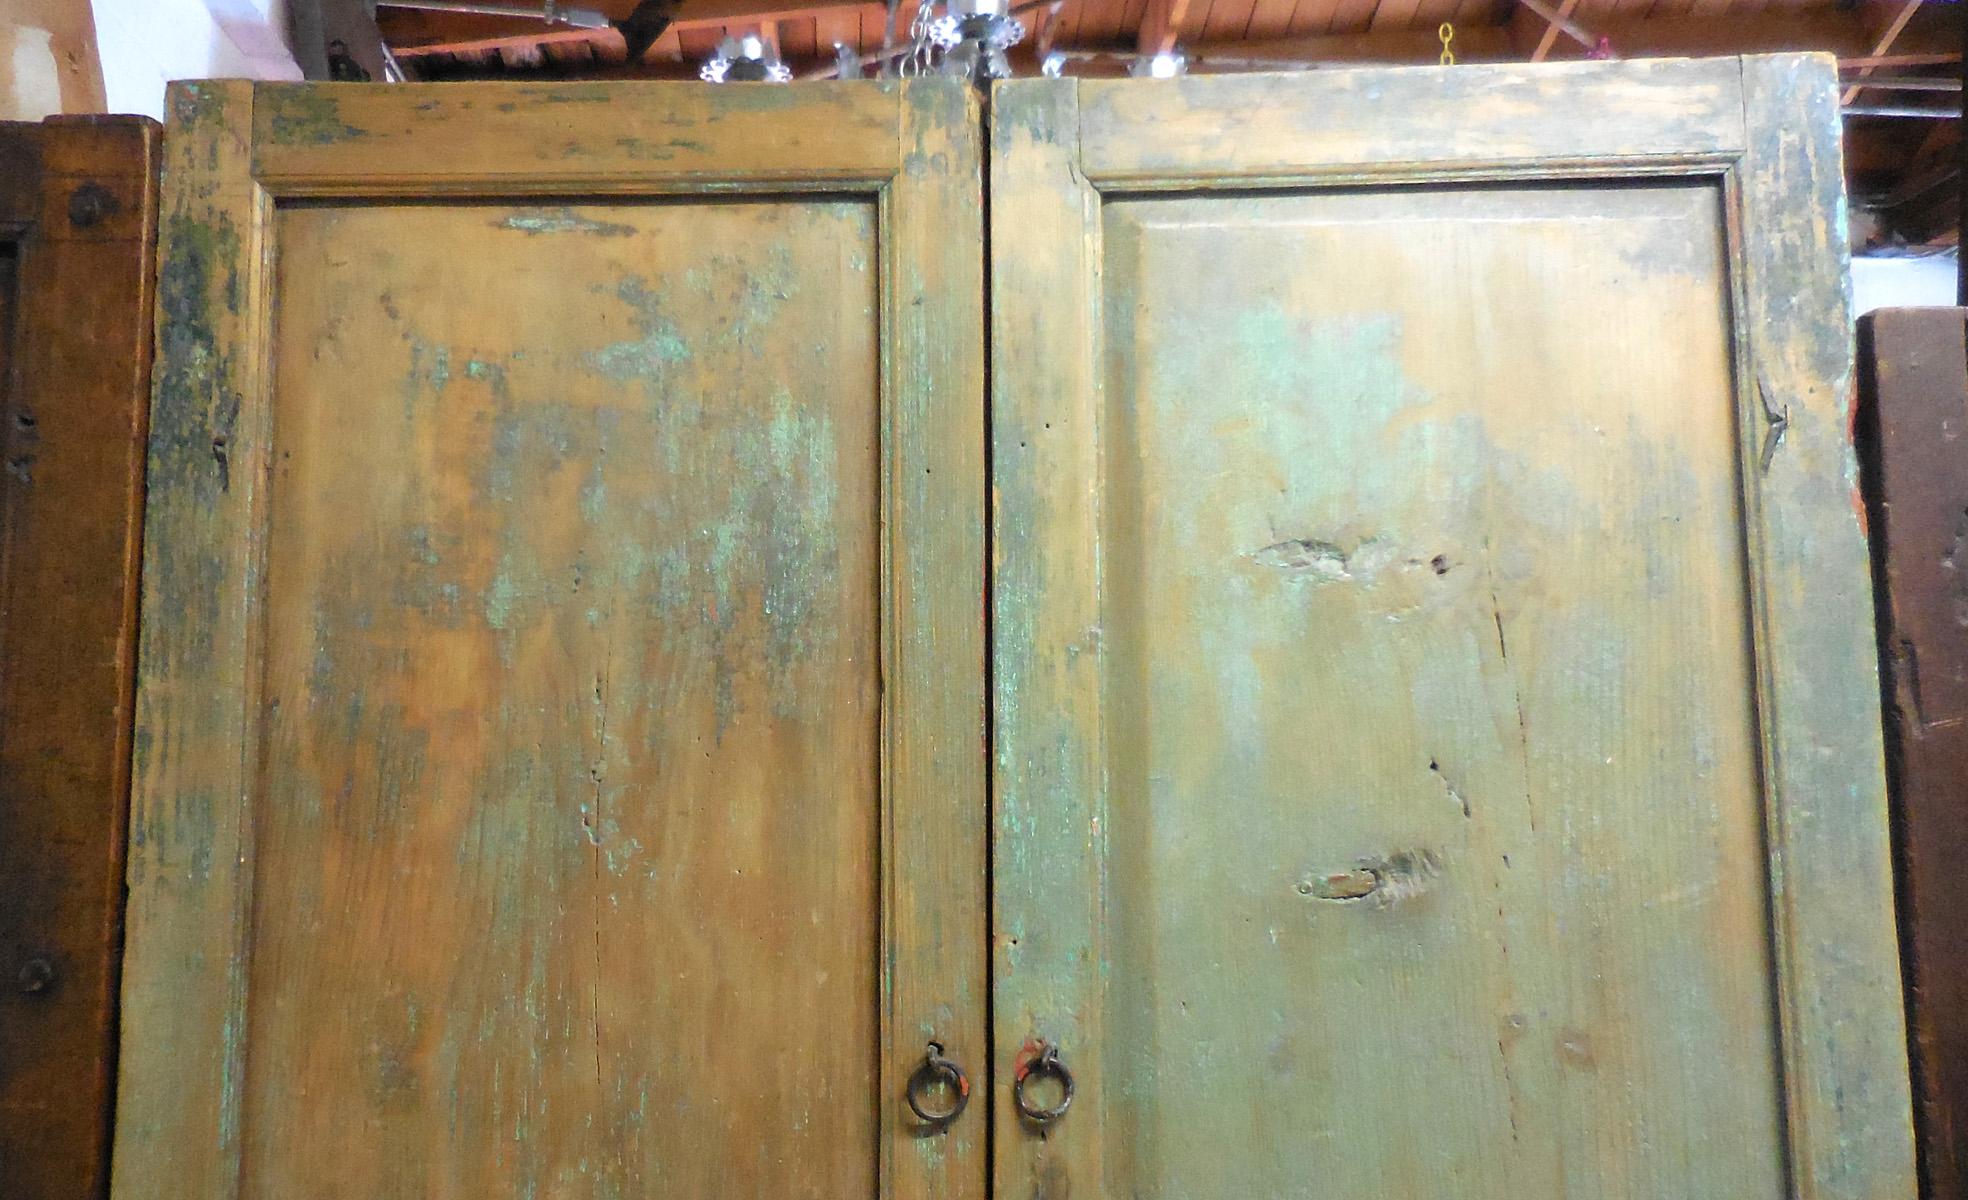 Beautiful pair of 19th century, antique doors with traces of old paint, green and red. Original, old hardware. 
One door has a red back side and the other a natural color with some red paint. Beautiful, old worn patina throughout.